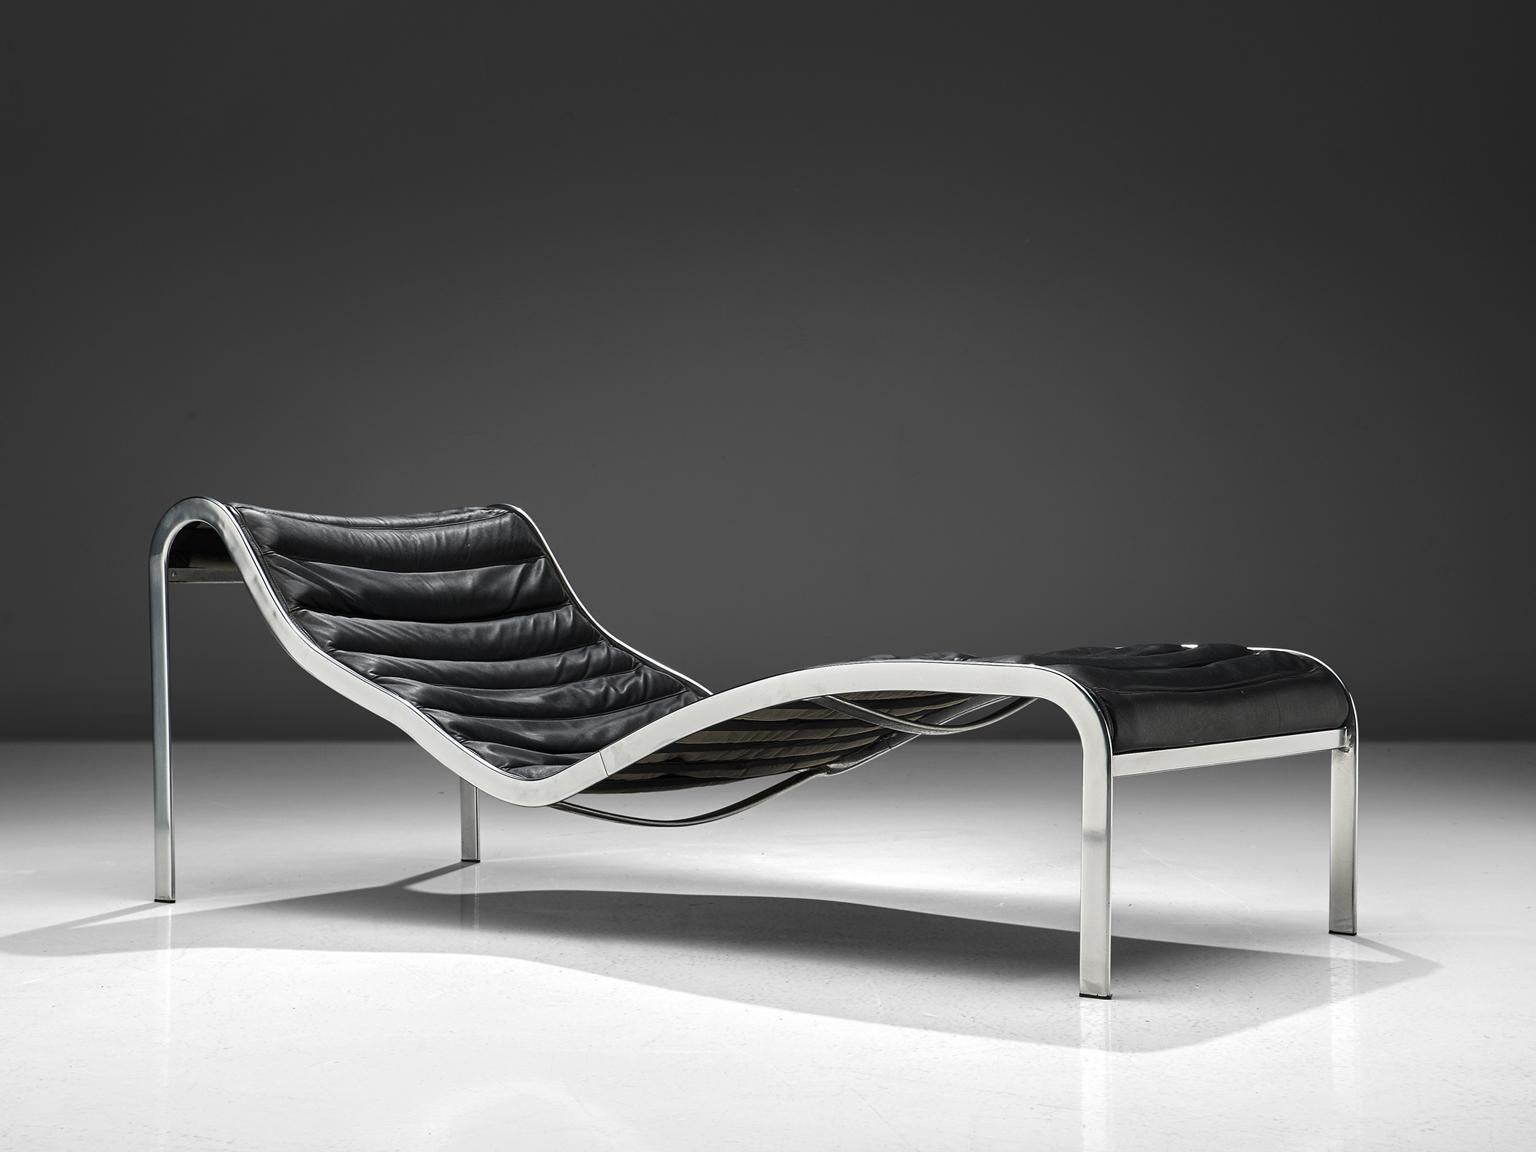 Olivier Mourgue for Airborne, chaise longue, black leather, steel, France 1960s. 

A rare chaise loungefrom the 'Whist' collection by Olivier Mourgue. Only 10 pieces were produced of this model. This chaise loungechair was featured in the James Bond